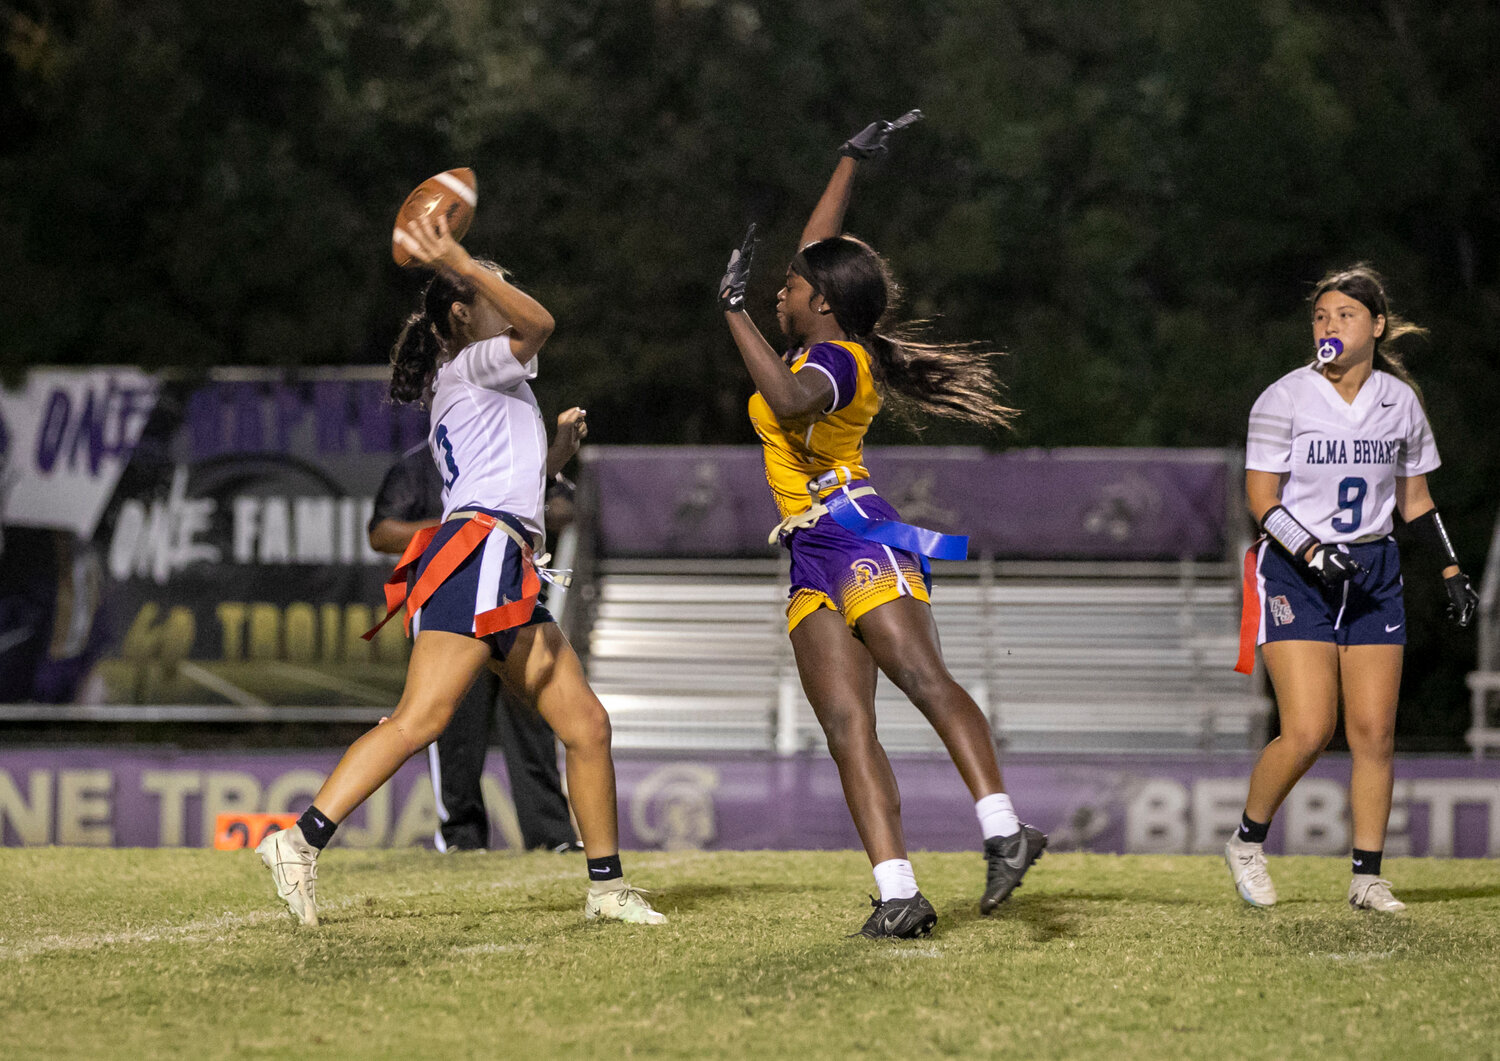 Daphne junior Tiyana Richardson applies pressure on the Alma-Bryant quarterback during Monday’s regional championship game between the Trojans and Hurricanes at Jubilee Stadium. The Daphne defense came up with big stops down the stretch to help lock in a 13-7 victory and a berth to the state tournament.